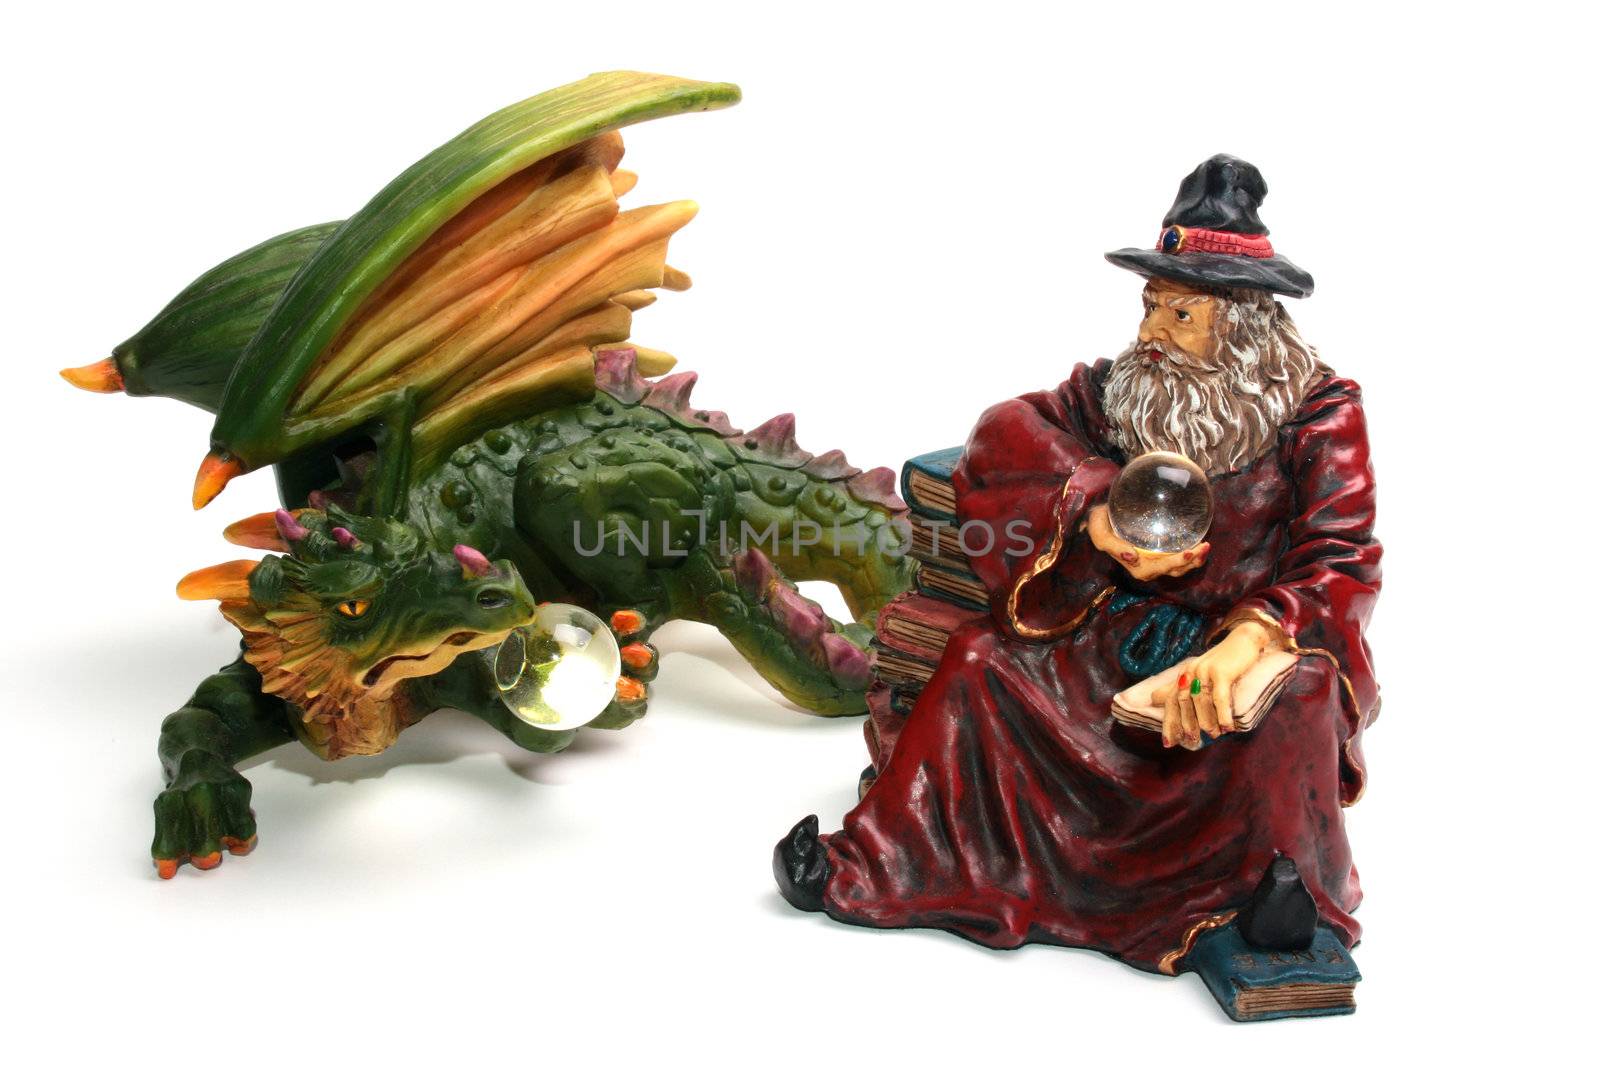 Ceramic figures of a dragon and the wizard on a white background.